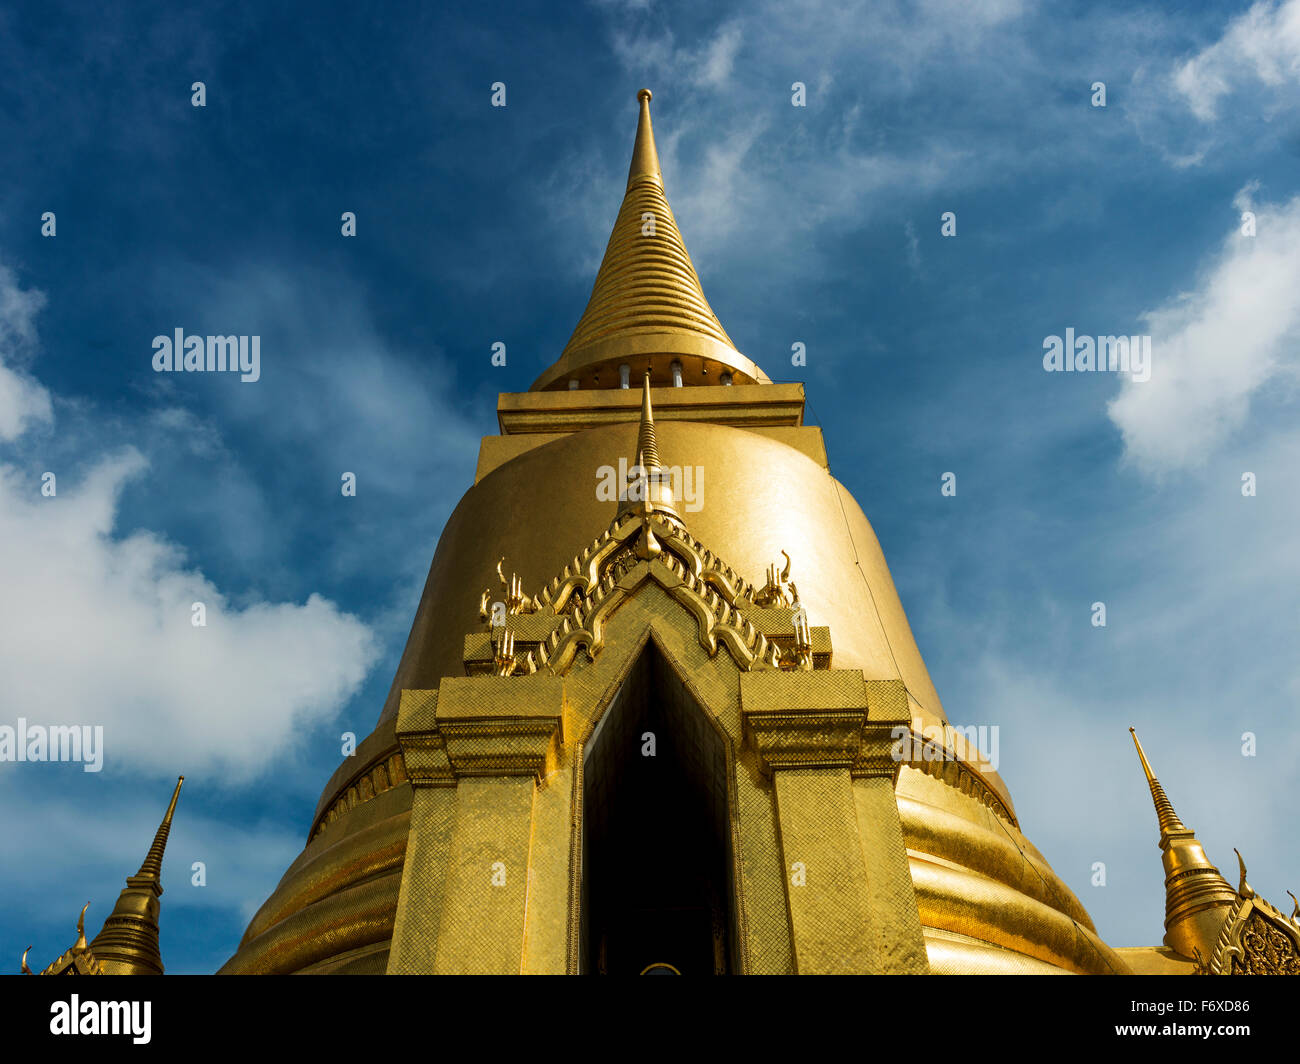 Gold structure with spire against a blue sky and cloud, Temple of the Emerald Buddha (Wat Phra Kaew); Bangkok, Thailand Stock Photo